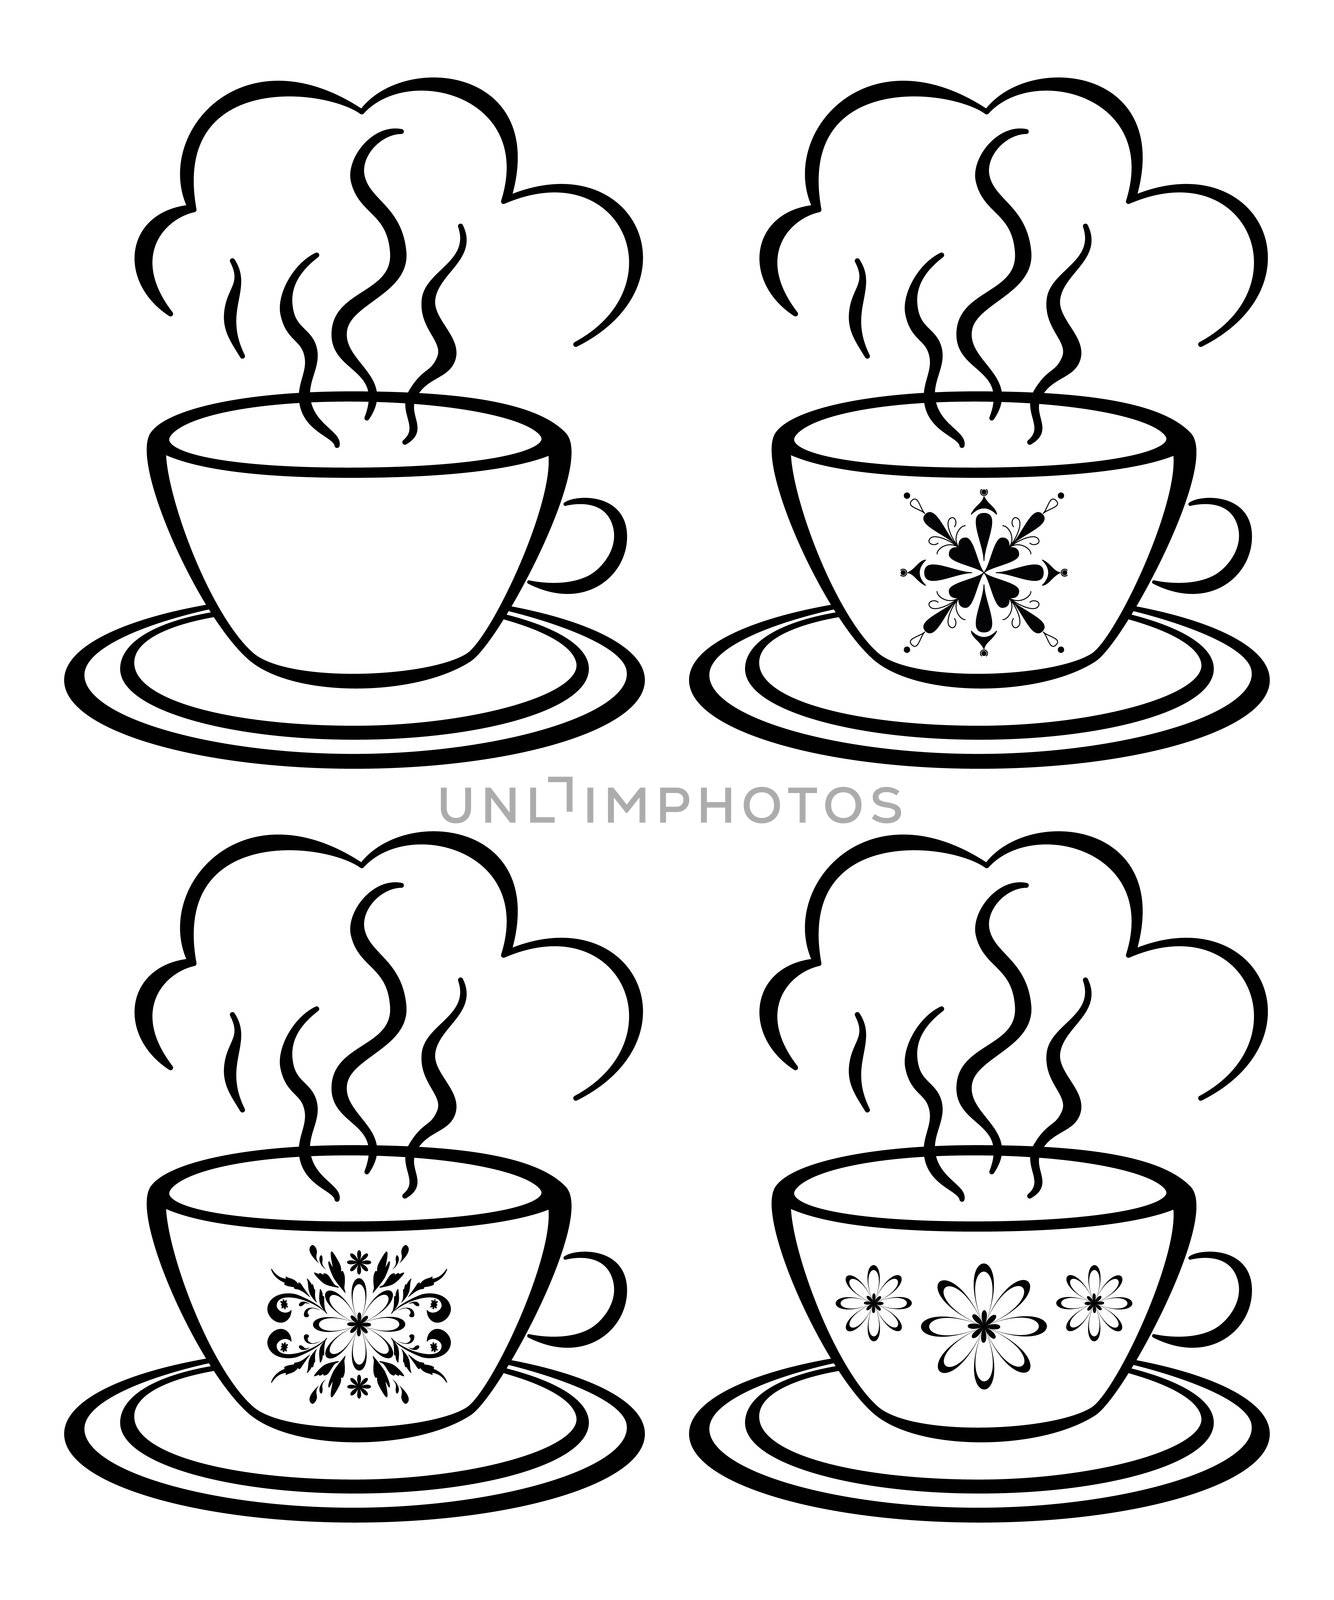 Set cups with a hot drink and floral pattern, black contour on white background.